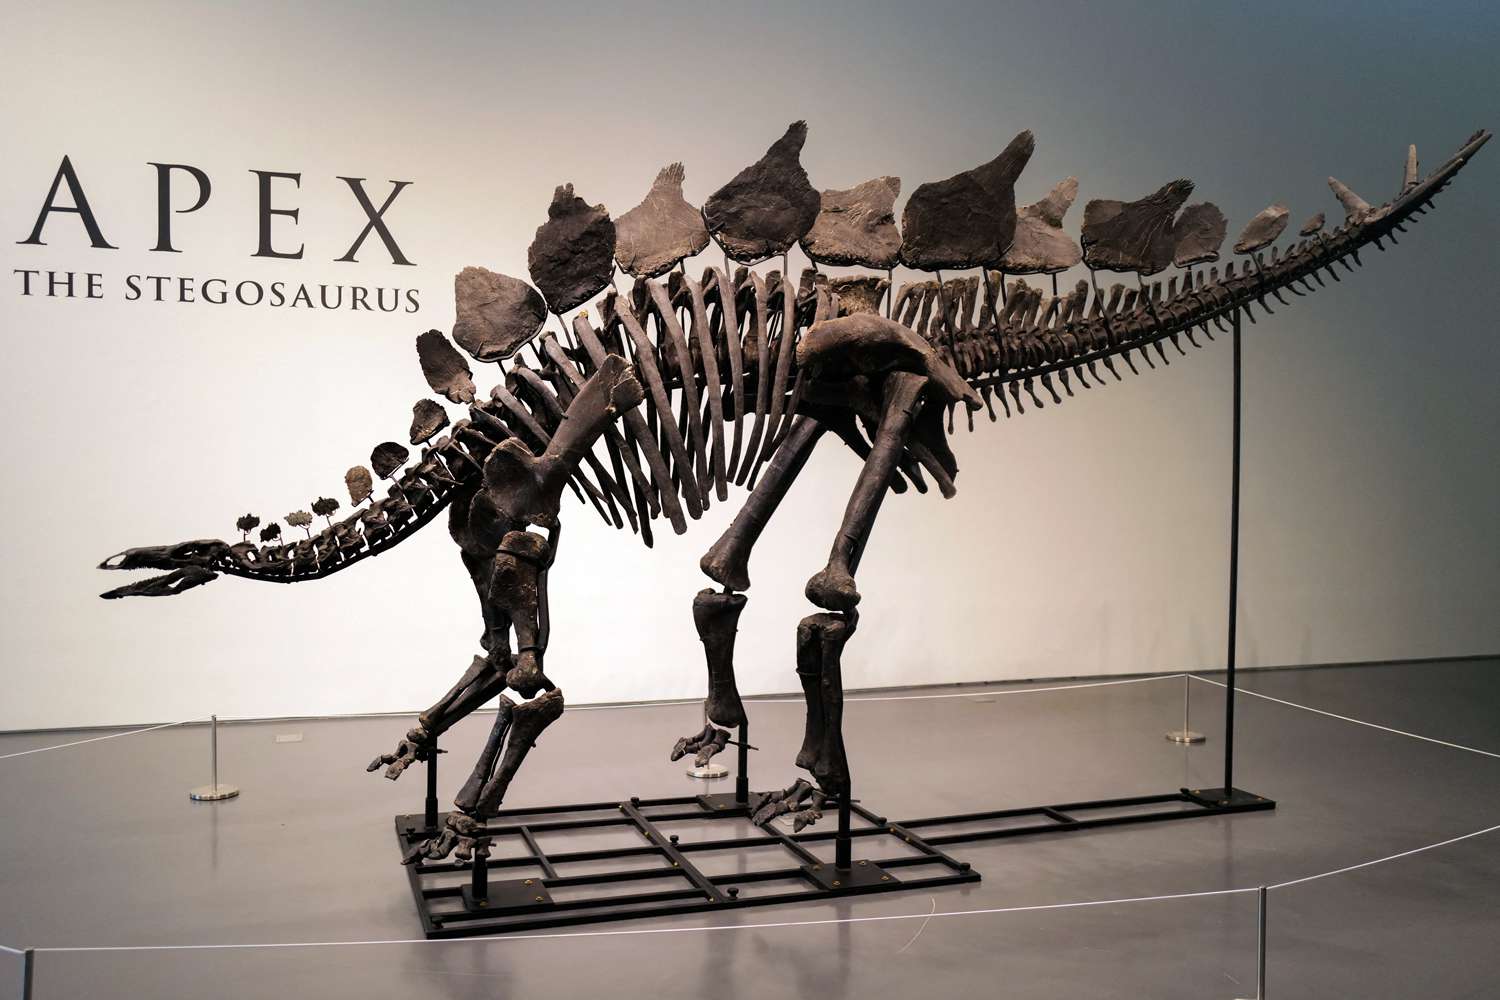 Stegosaurus Named Apex Sells for Record $45 Million – What Makes It So Special?